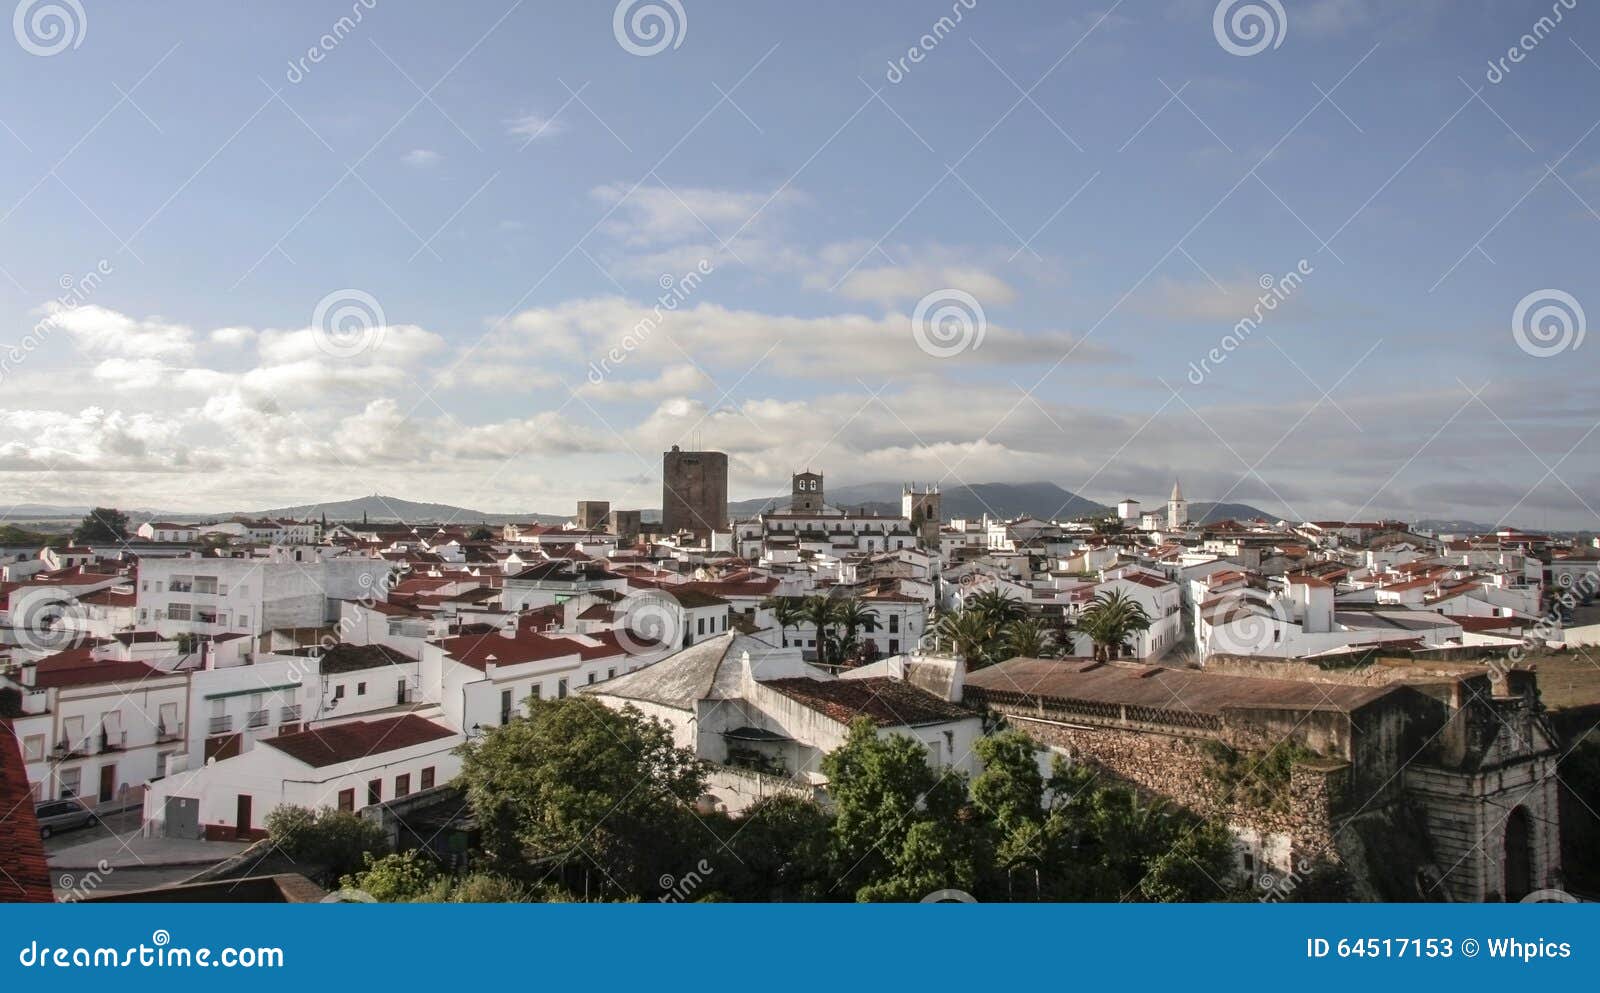 aerial view of olivenza town, spain